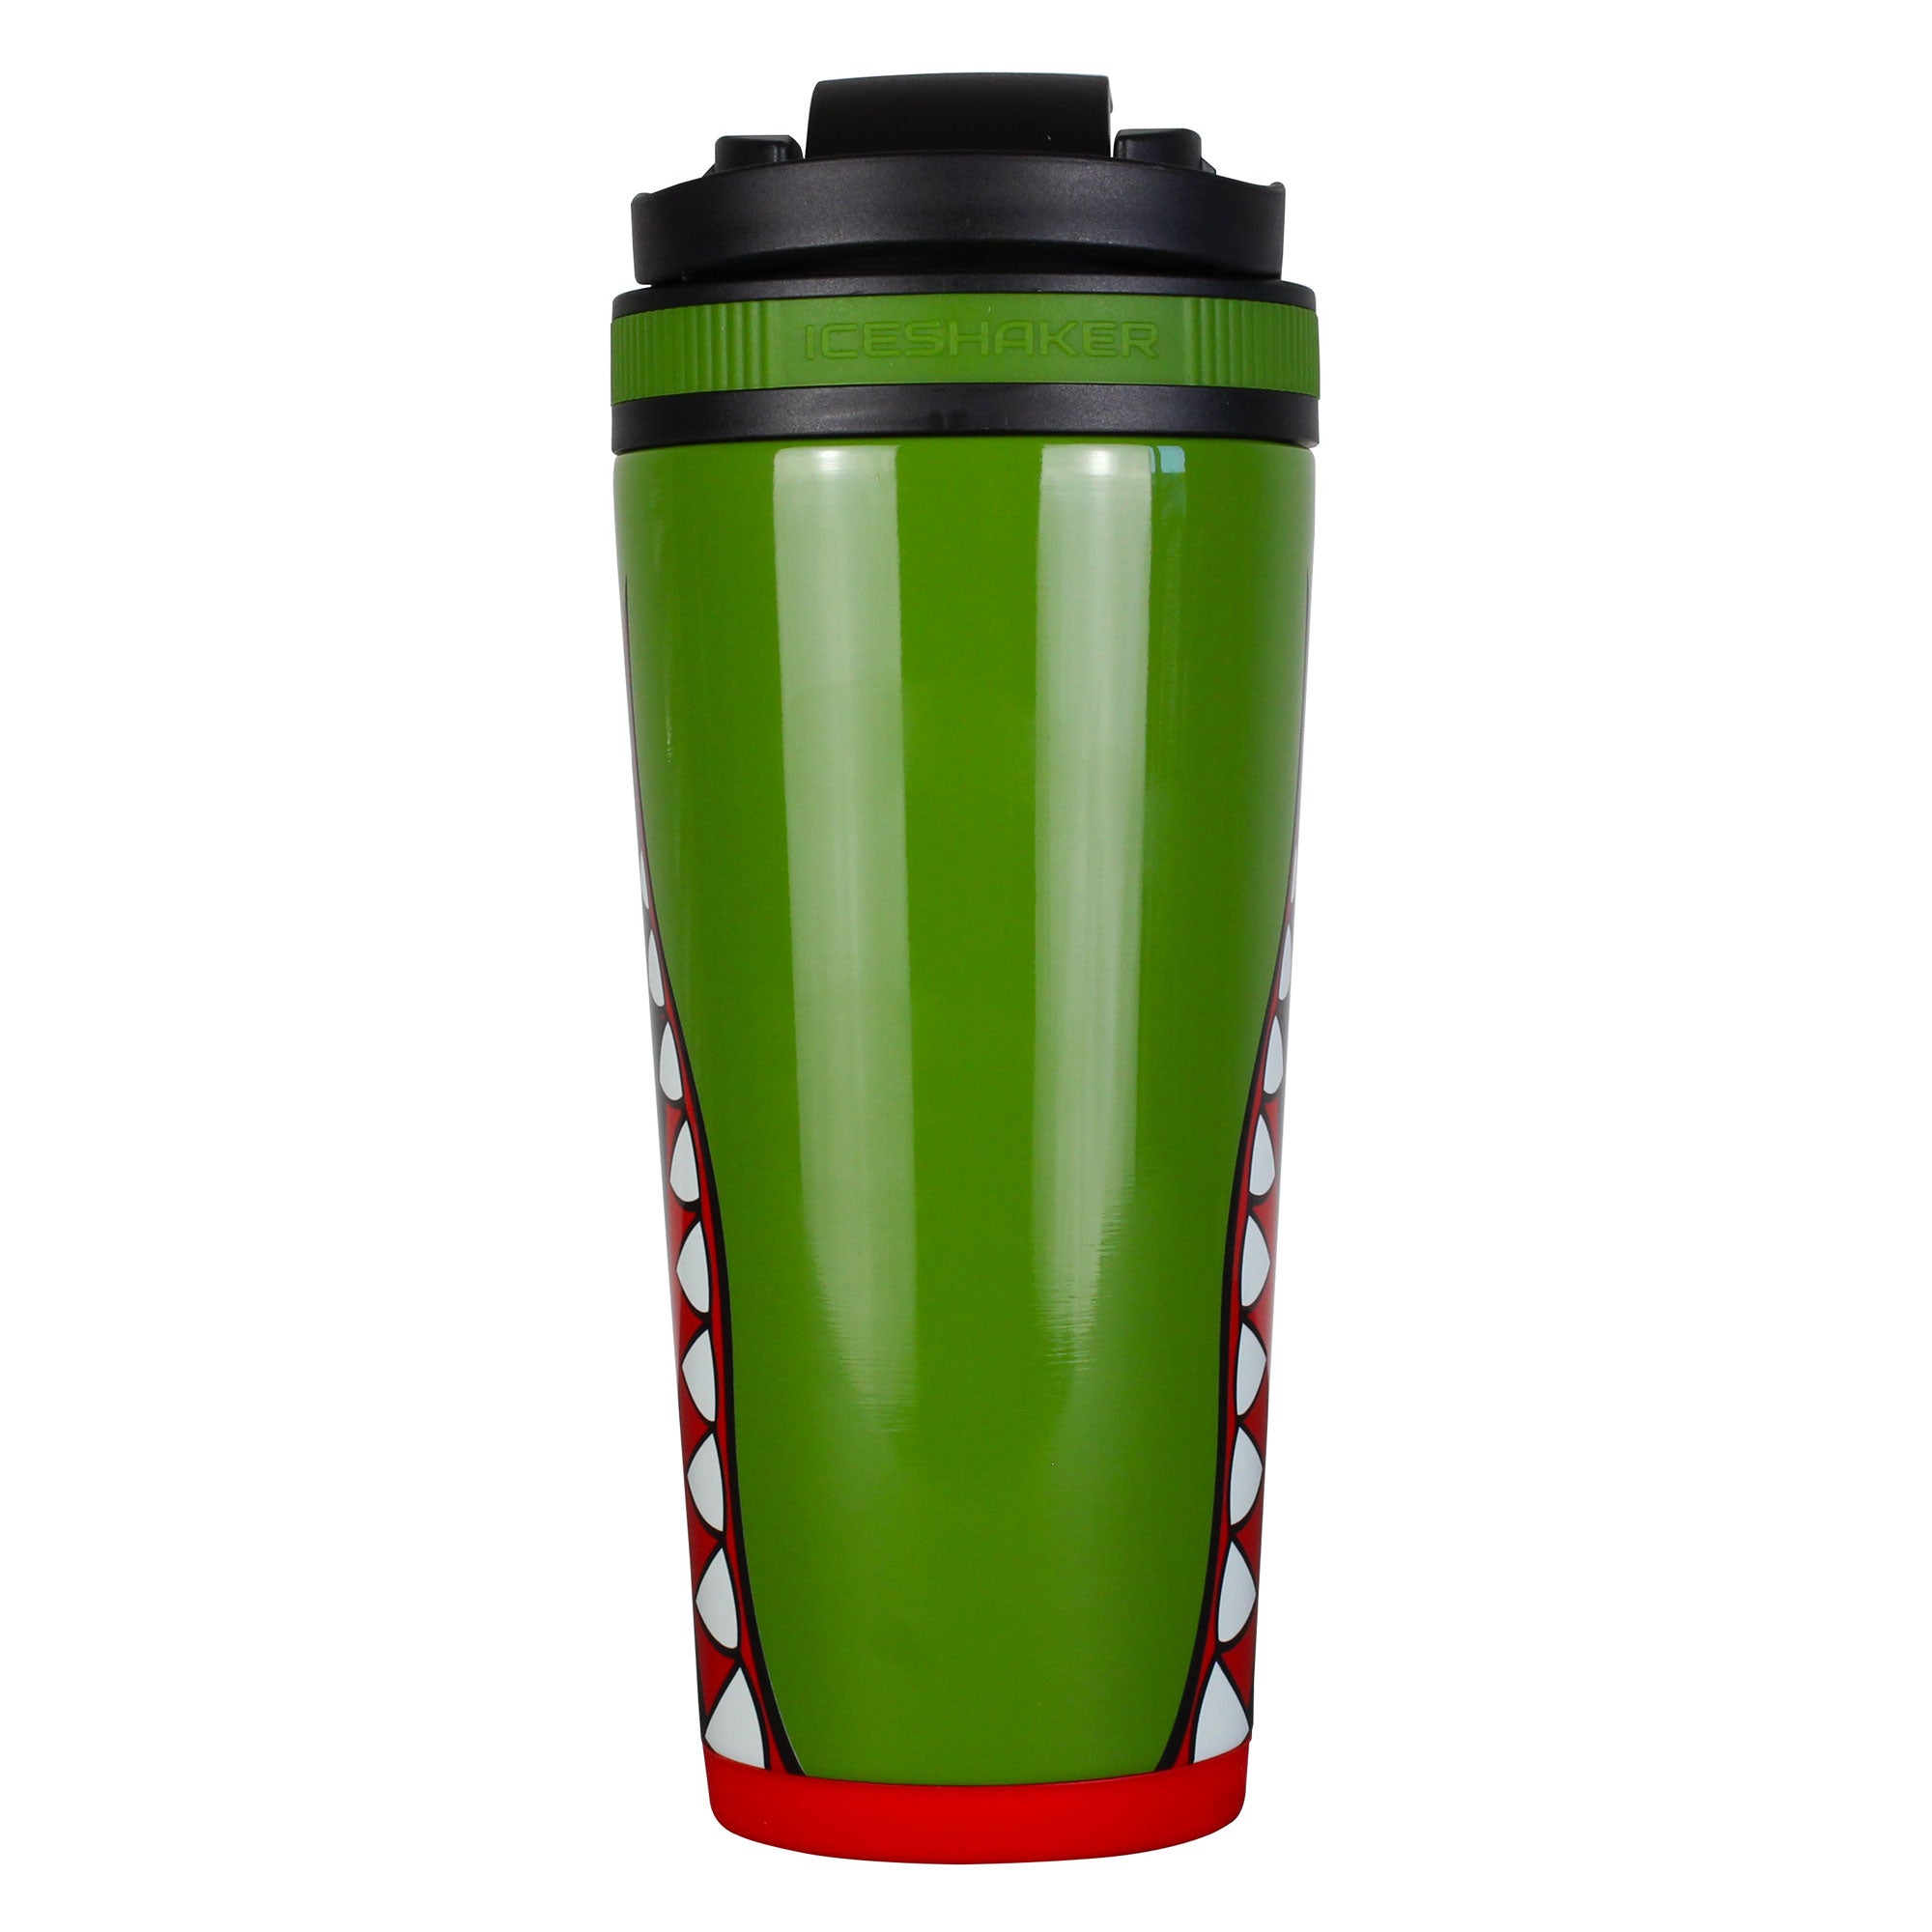 Super Hydro Protein Shaker Bottle [3 PACK] - 28 Oz. BPA-Free, Dishwasher  Safe Shakers For Protein Sh…See more Super Hydro Protein Shaker Bottle [3